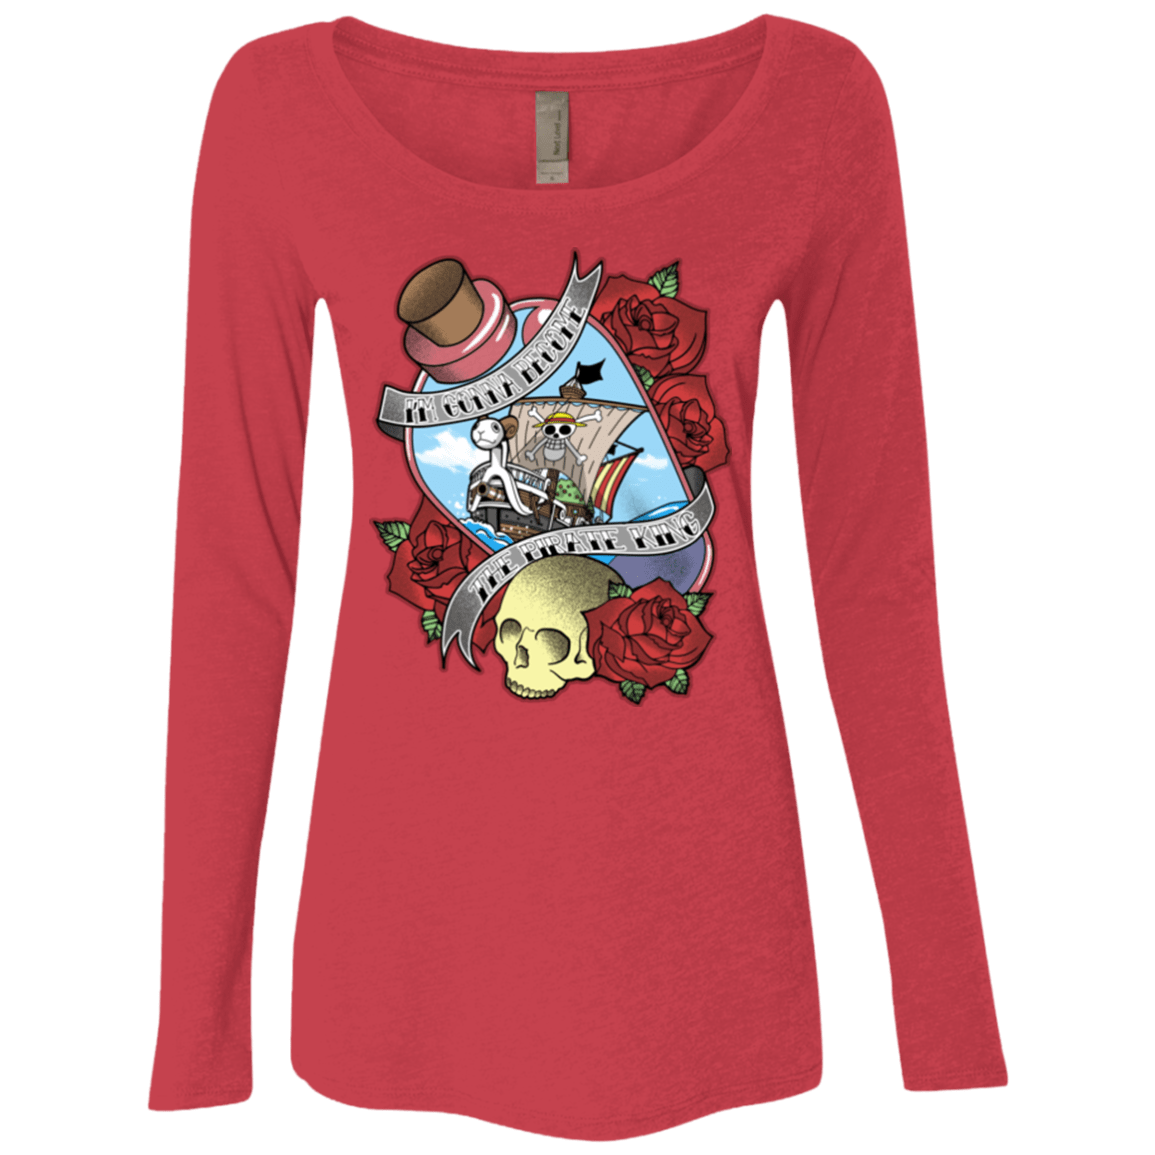 T-Shirts Vintage Red / Small The Pirate King Women's Triblend Long Sleeve Shirt